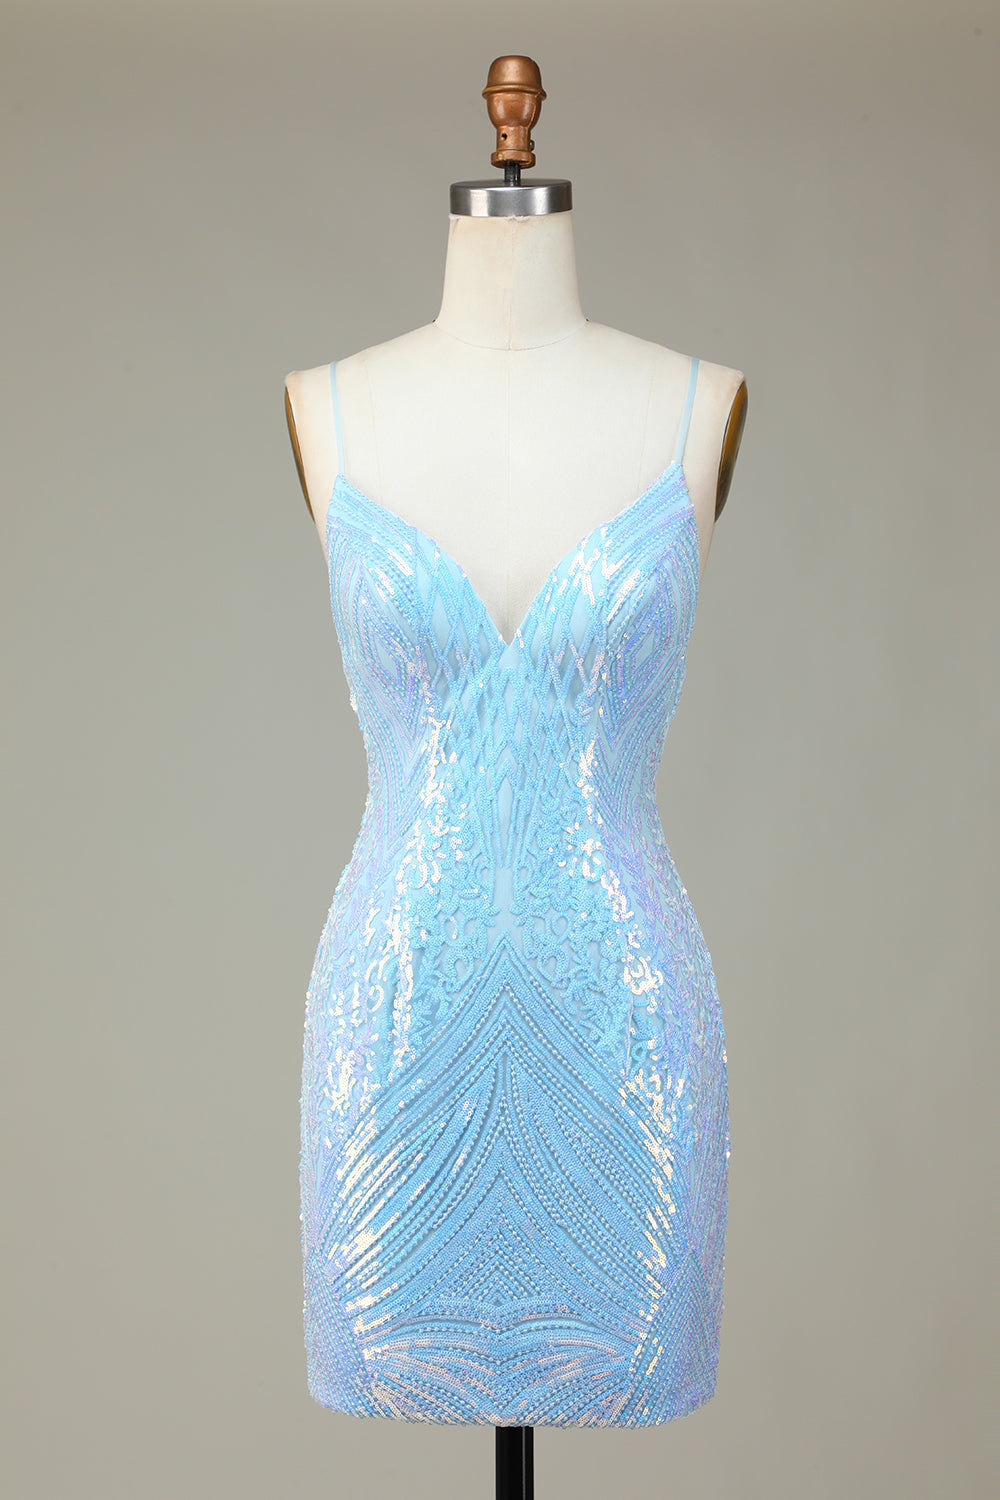 Sparkly Sheath Spaghetti Straps Blue Sequins Short Homecoming Dress with Backless